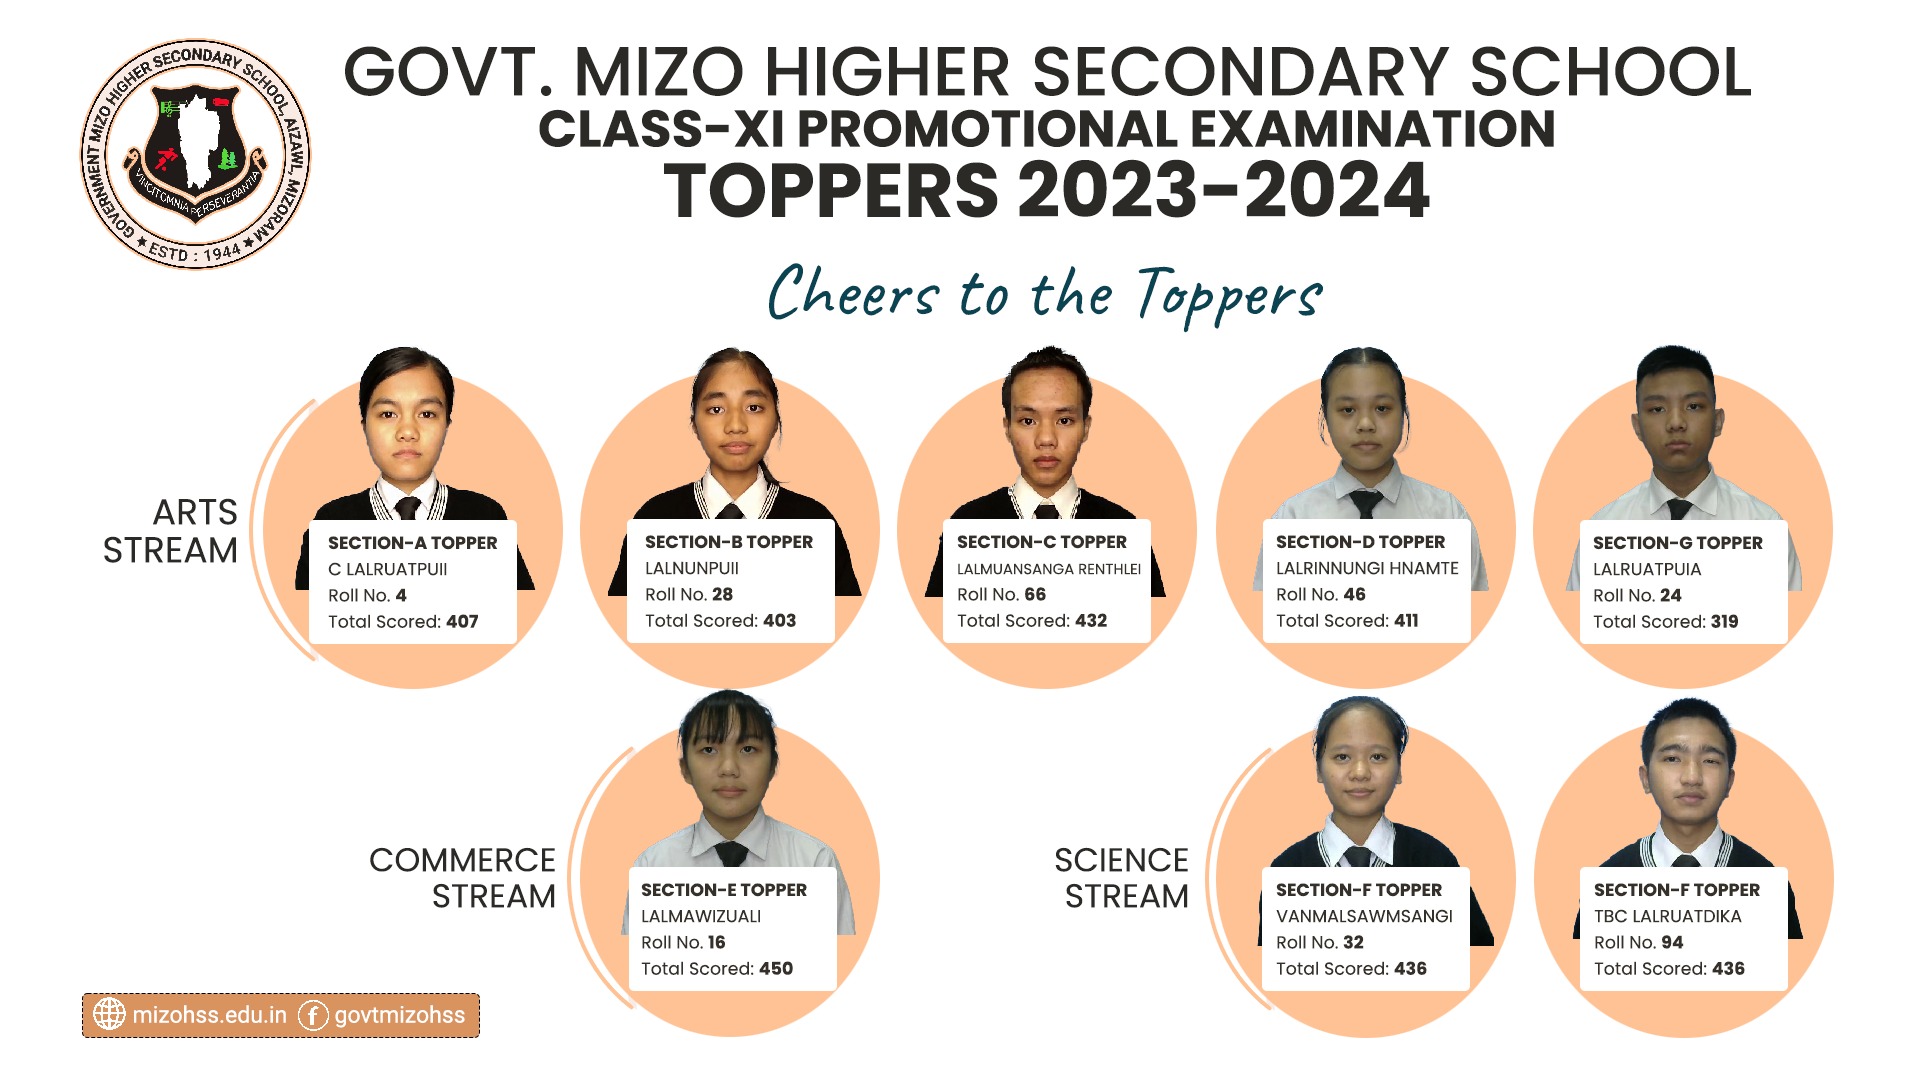 TOPPERS 2023-2024